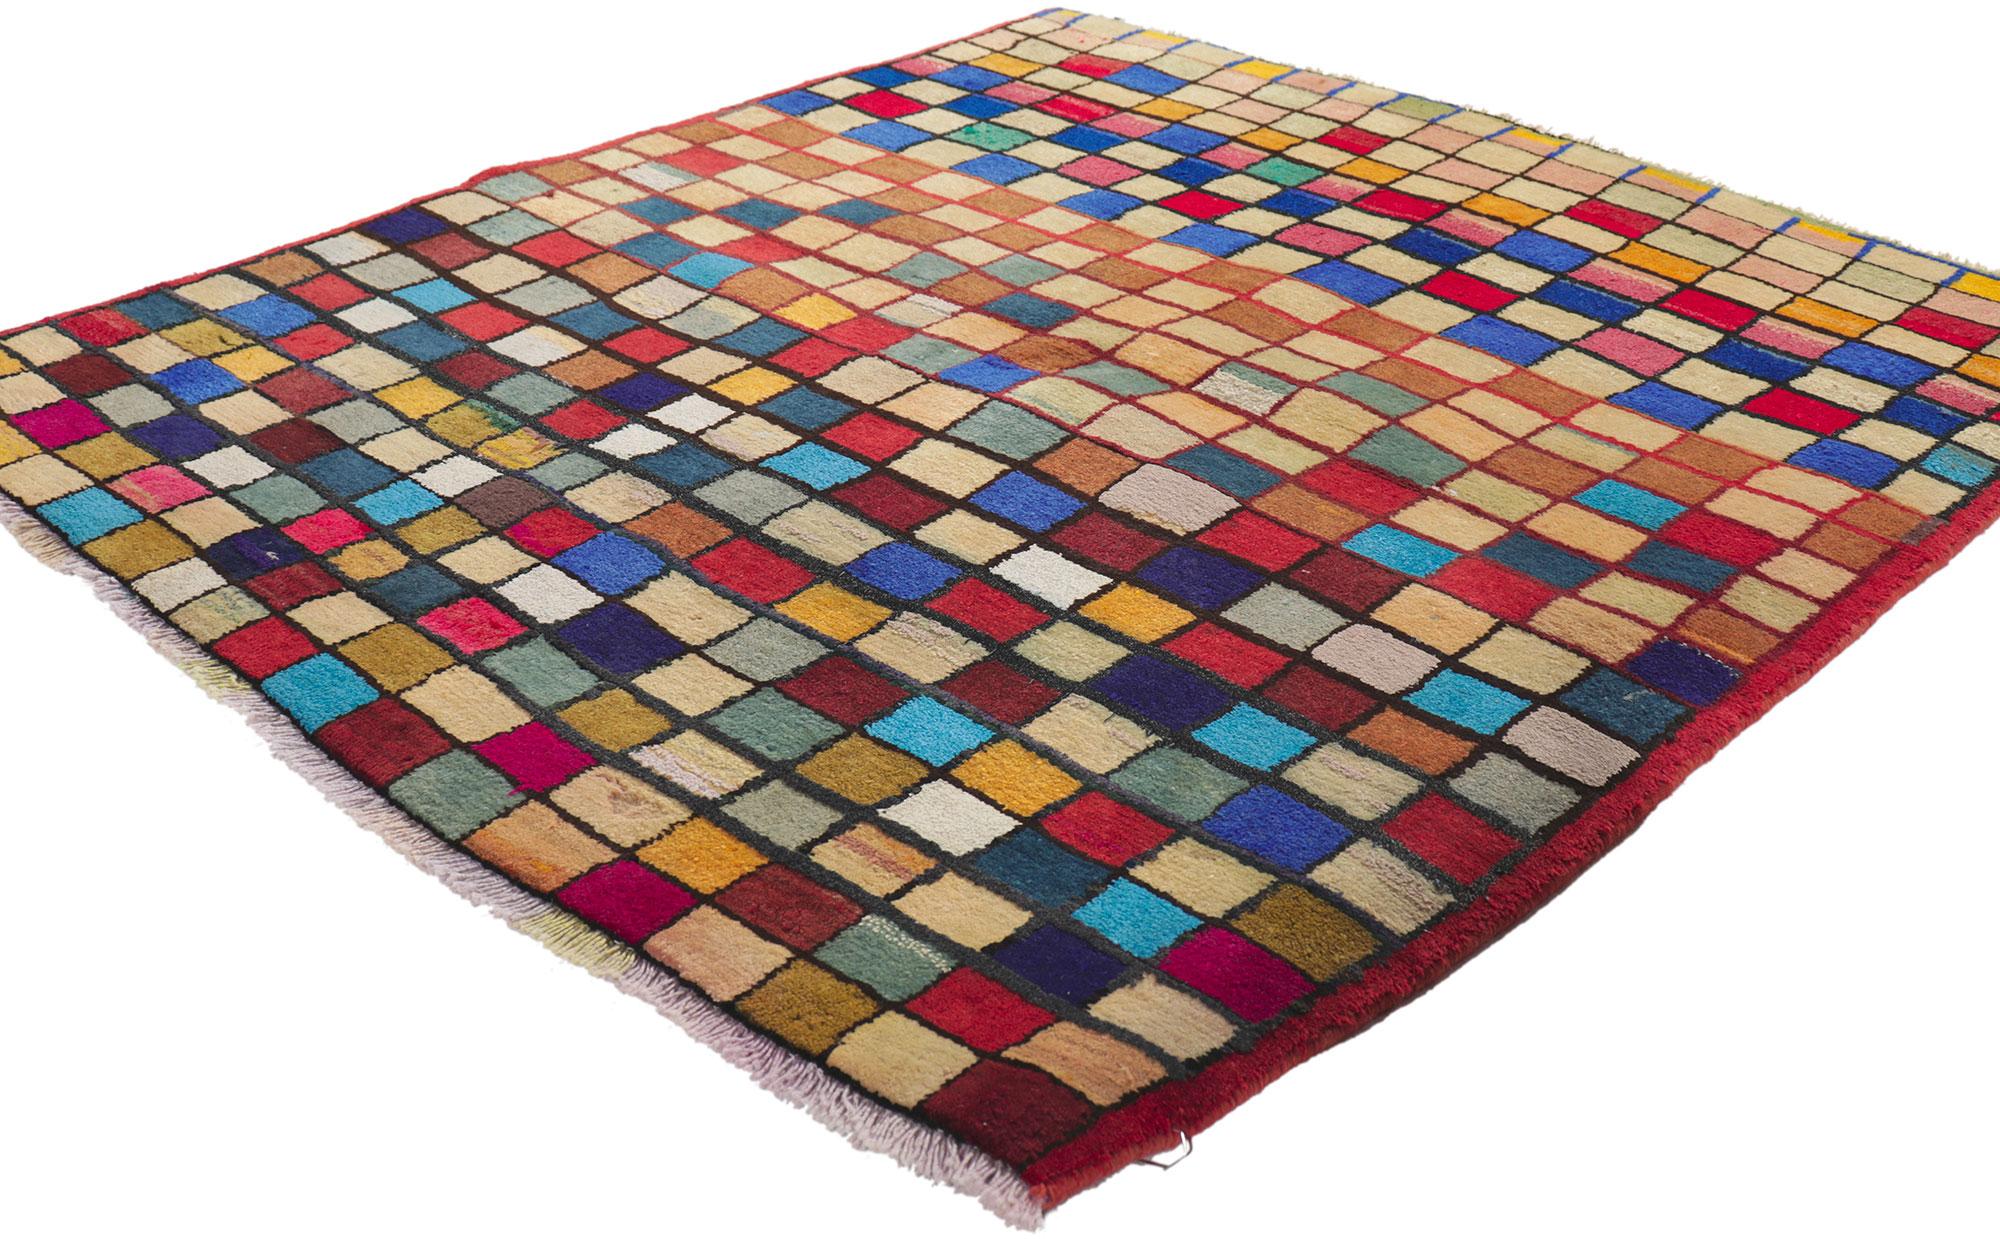 61215 Vintage Persian Gabbeh Rug, 03.05 x 04.00.
With its checkerboard design, incredible detail and texture, this hand knotted wool vintage Persian Gabbeh rug is a captivating vision of woven beauty. The eye-catching checkered pattern and lively